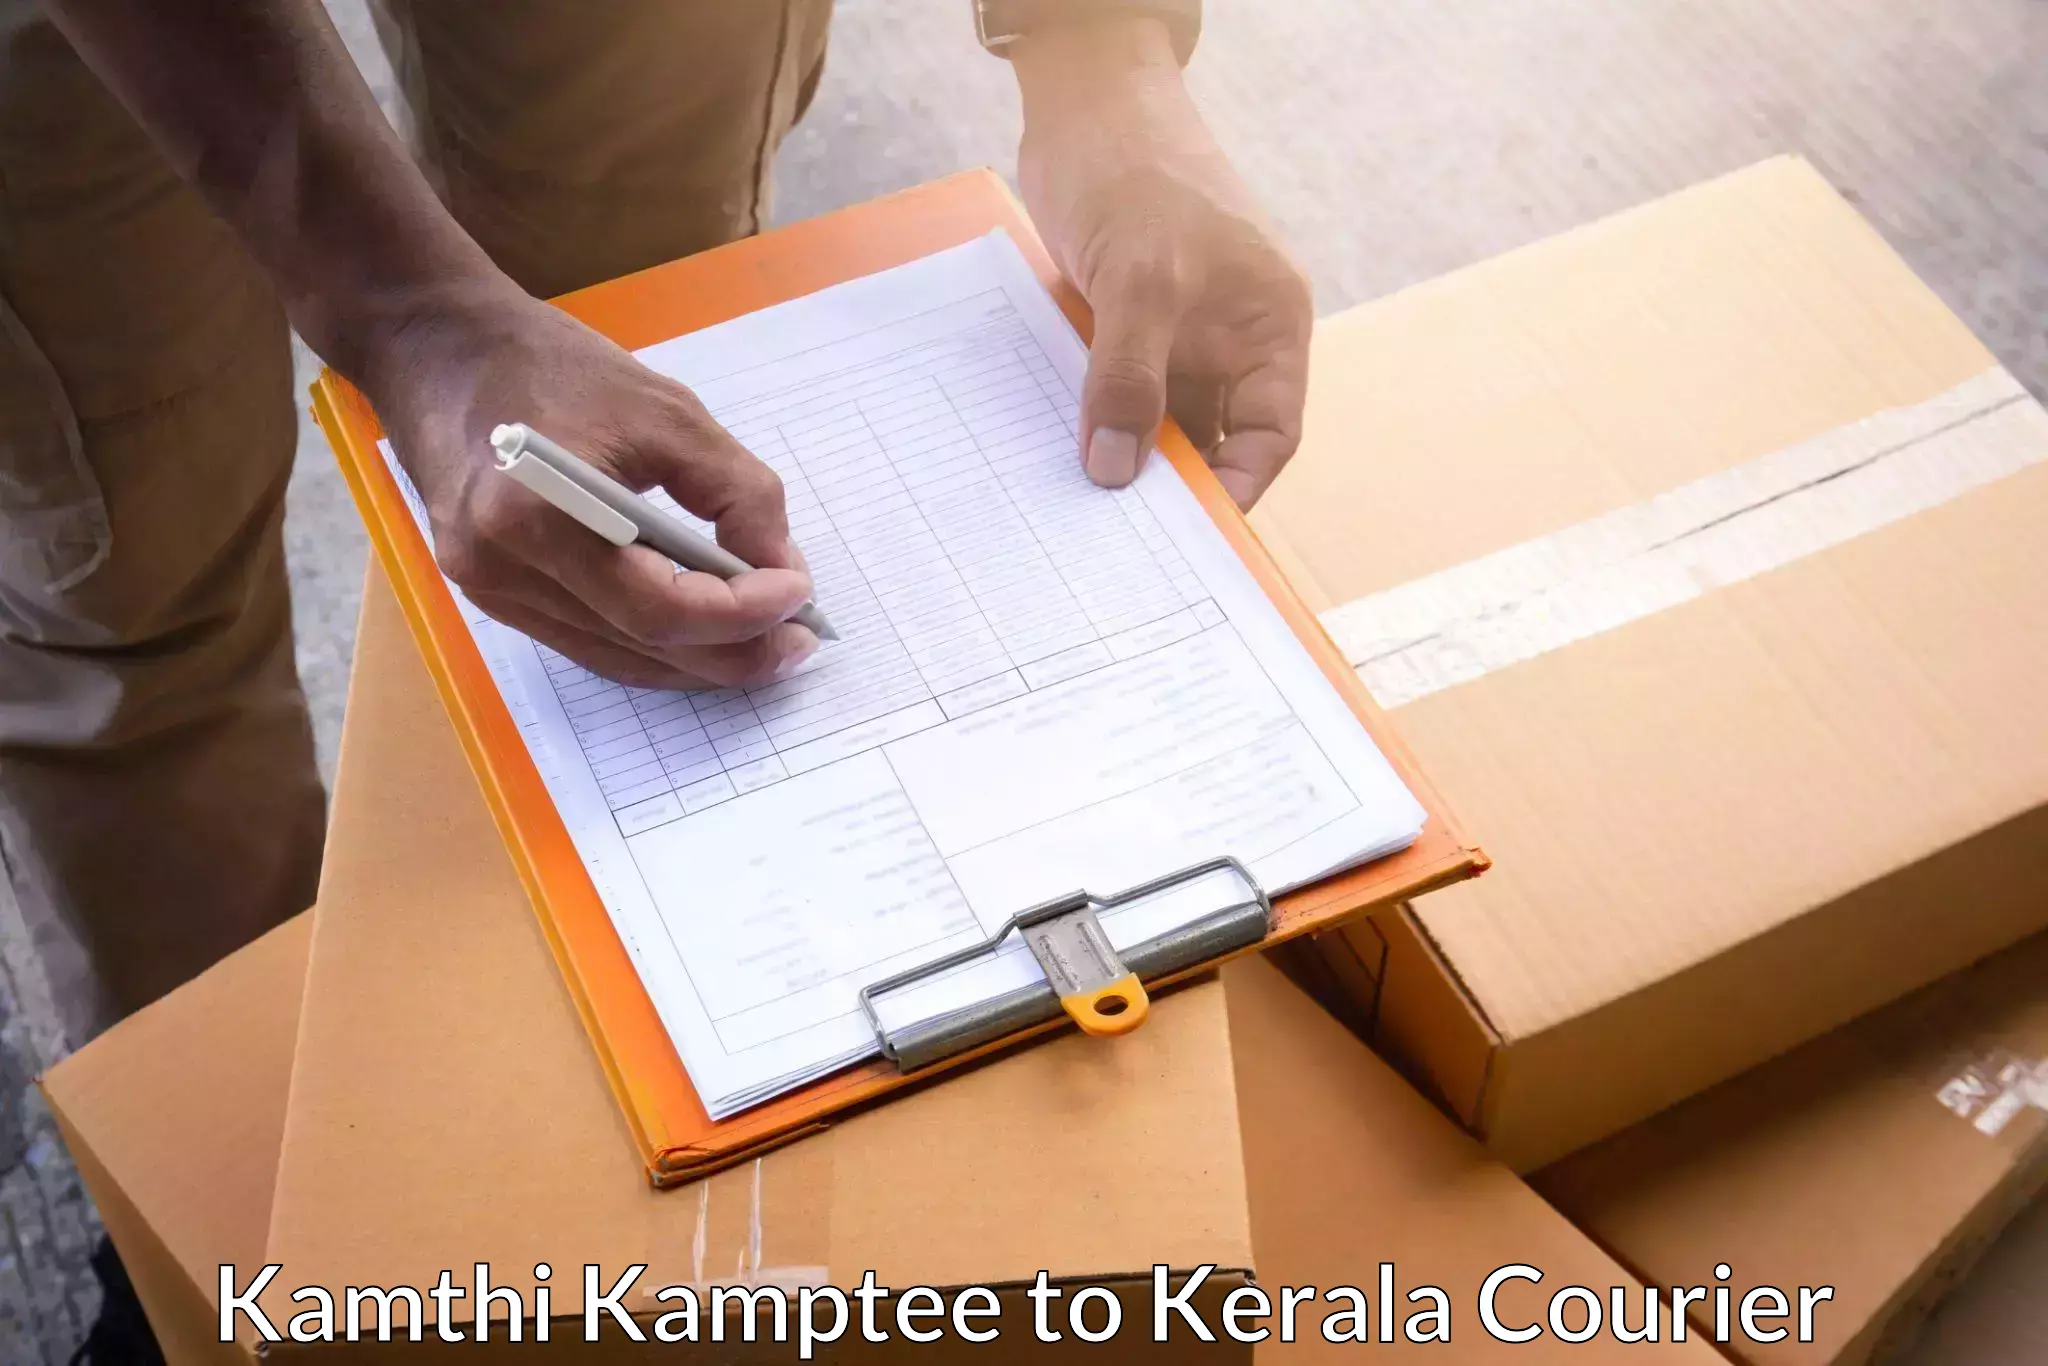 Professional courier services Kamthi Kamptee to Kerala